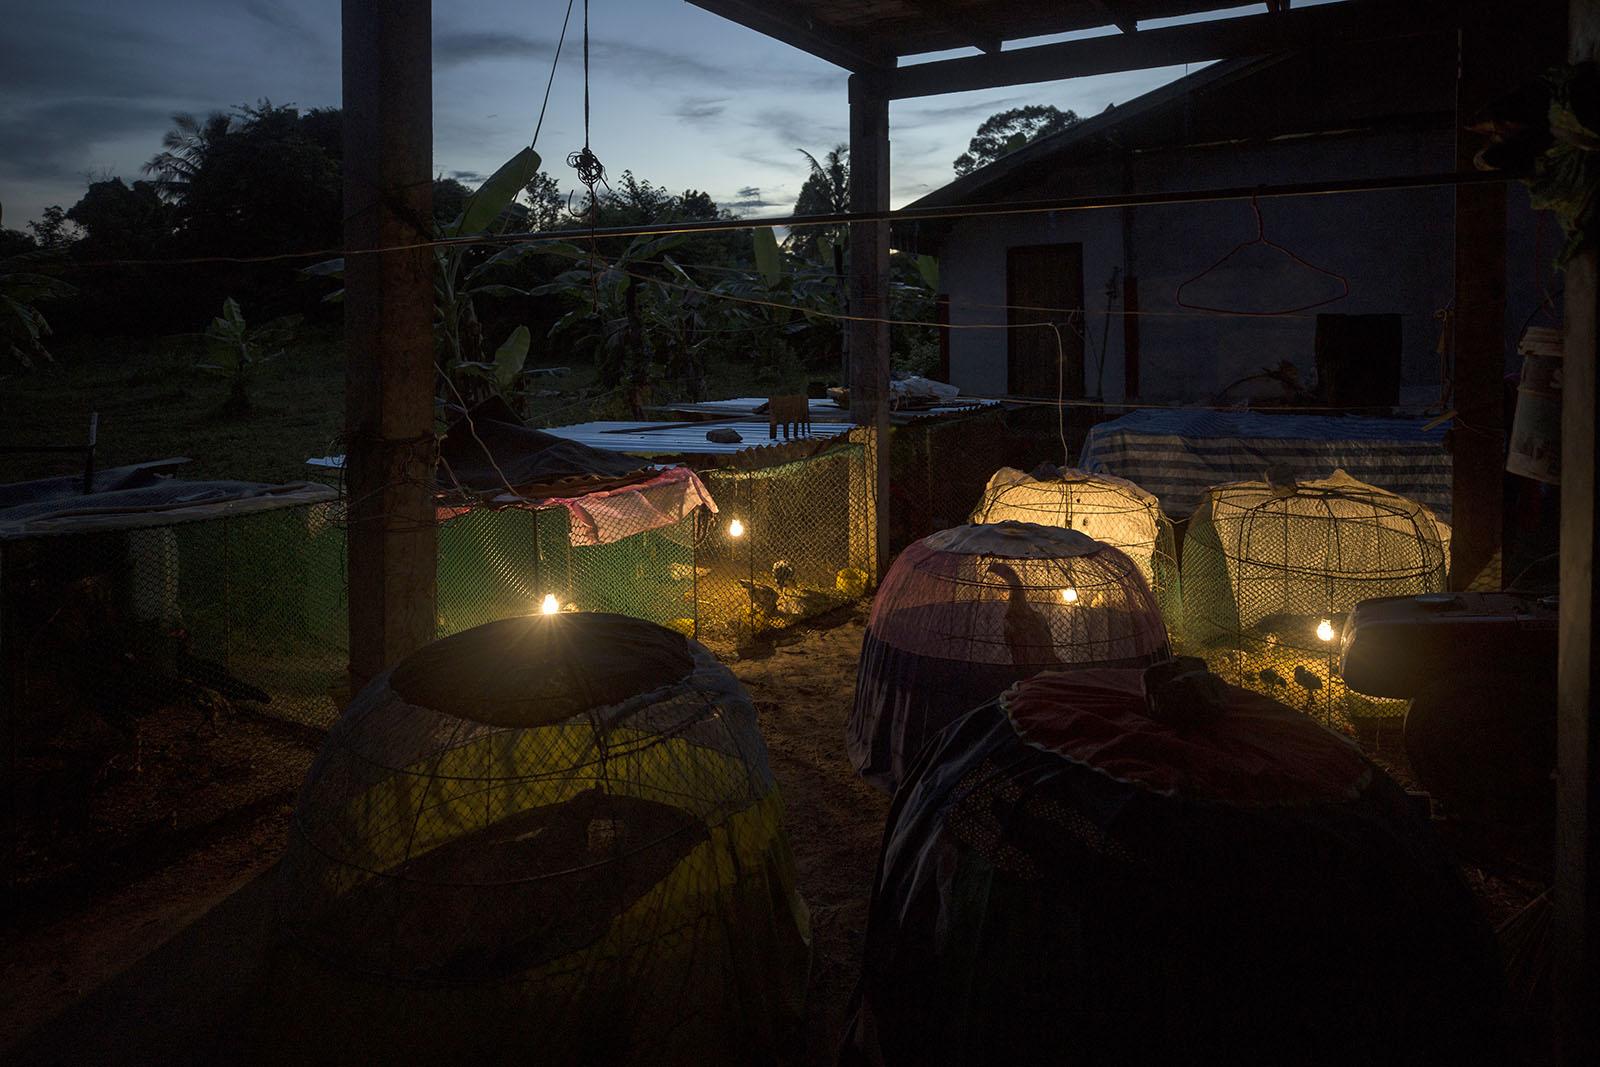 THREE DECADES OF AN ANTI-DAM STRUGGLE - Chicks are illuminated and warmed at night in a village...